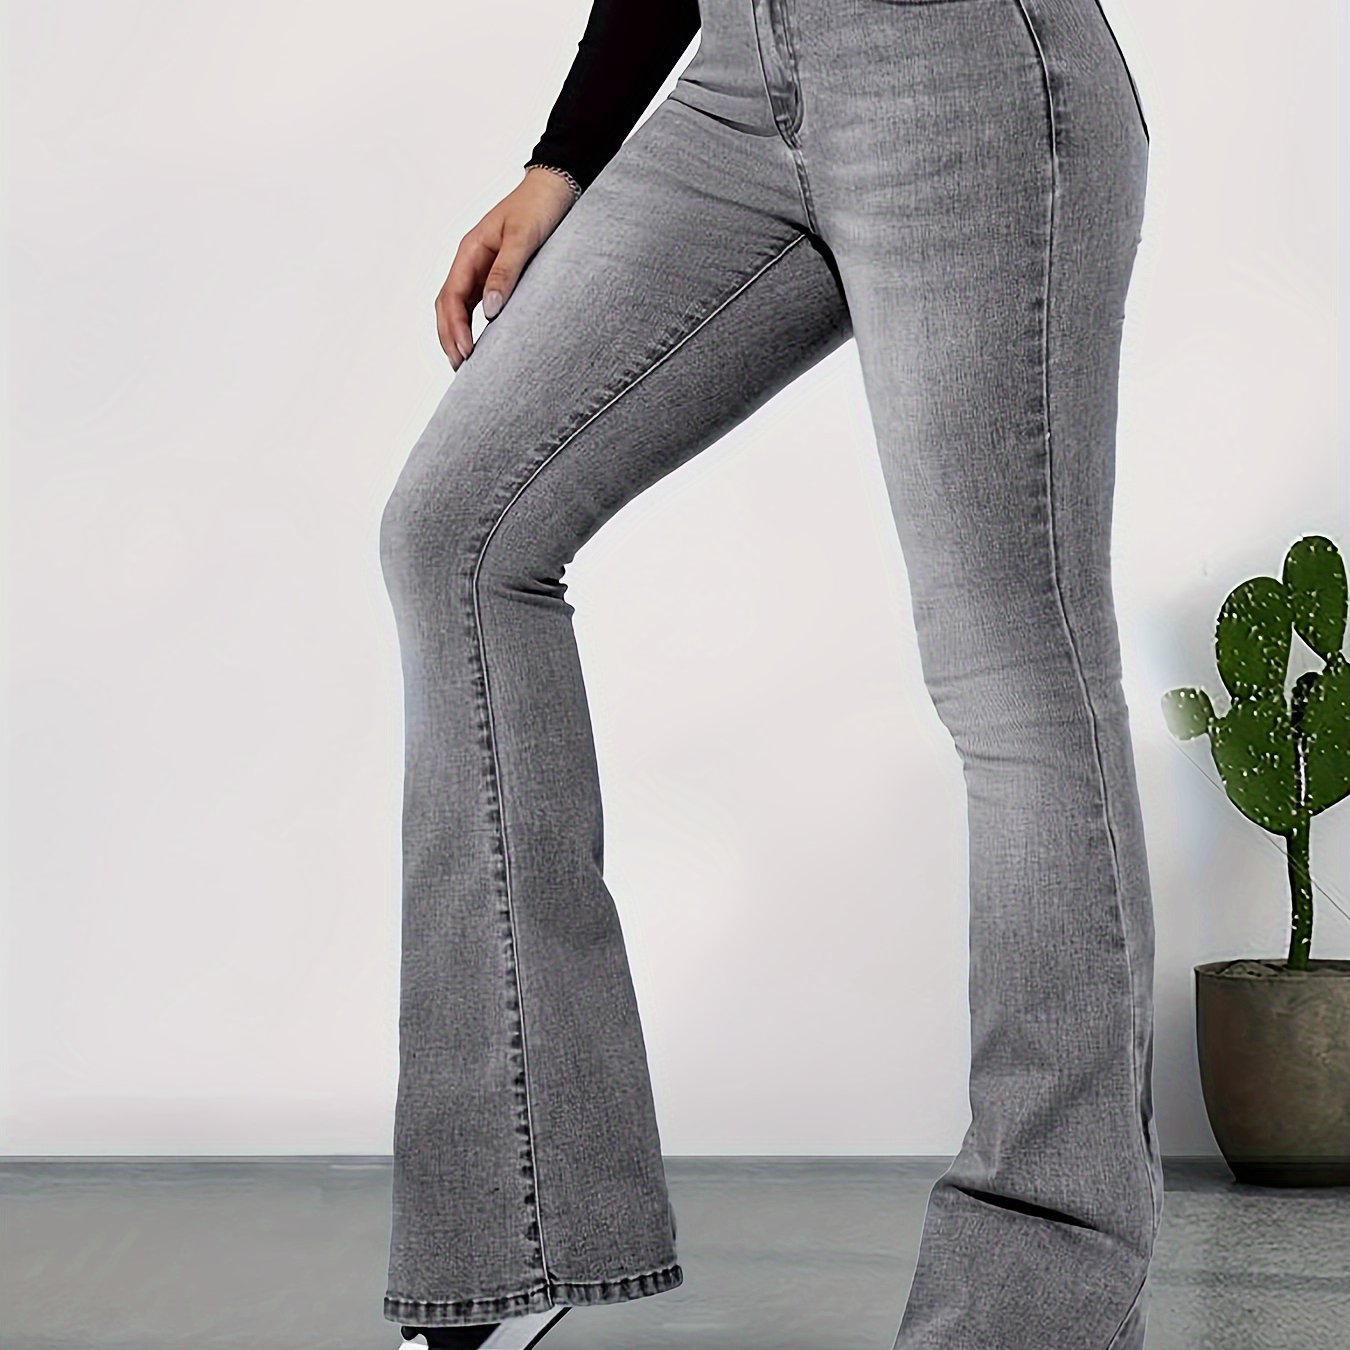 Jeans For Women High Waist Style Stretchable Plus Size Women's High Waist  Jeans Button Tassel Pants Trousers Bell-Bottom Pants Gray